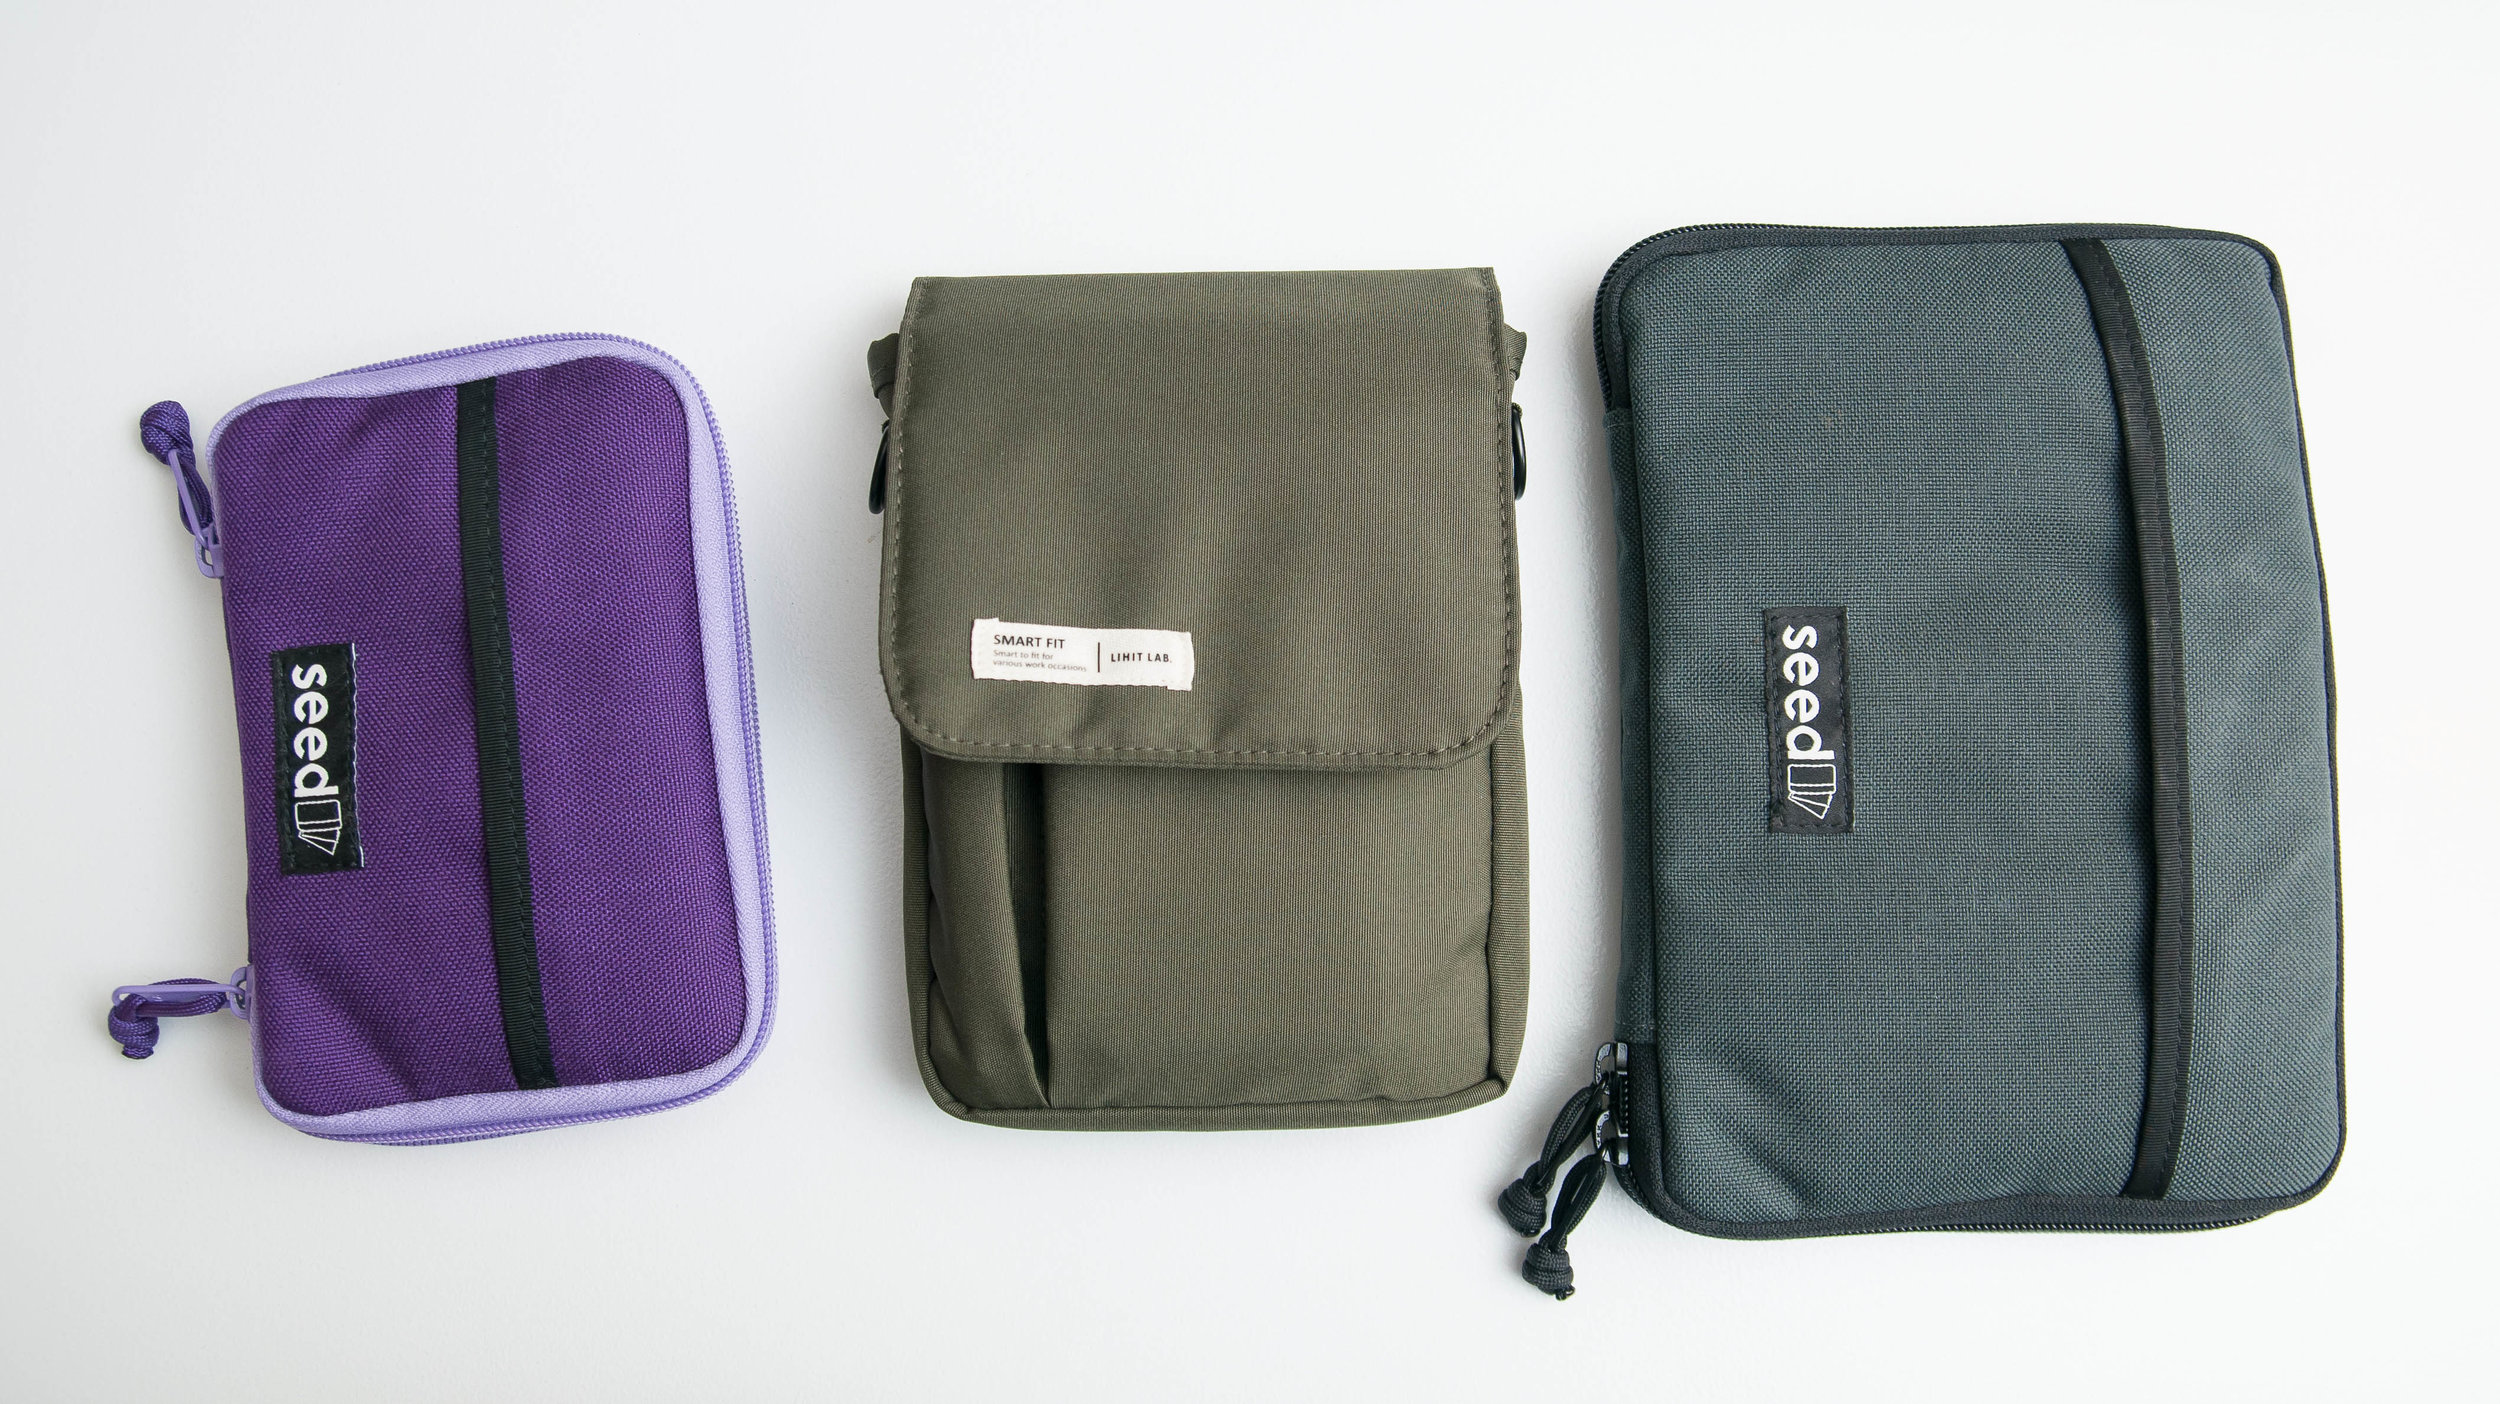 Review: Lihit Lab Smart Fit Carrying Pouch A6 - The Well-Appointed